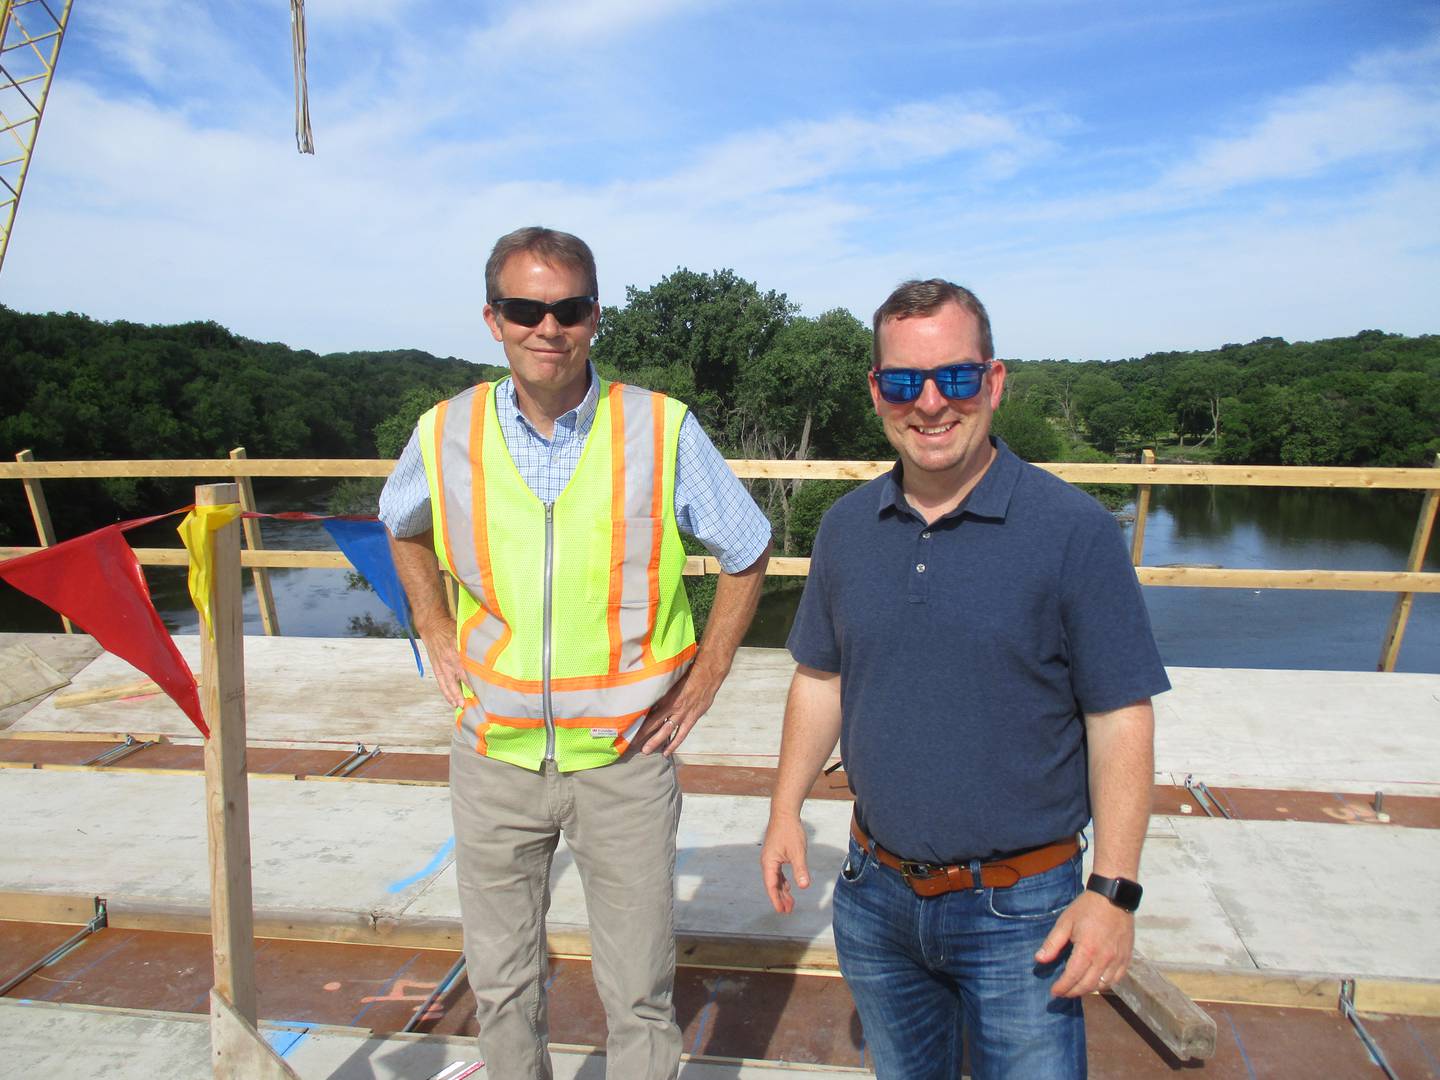 Kendall County Highway Engineer Fran Klaas, left, and county board Chairman Scott Gryder during an inspection tour of the Eldamain Road bridge, which commands picturesque views of the Fox River and surrounding forest preserve lands. (Mark Foster -- mfoster@shawmedia.com)